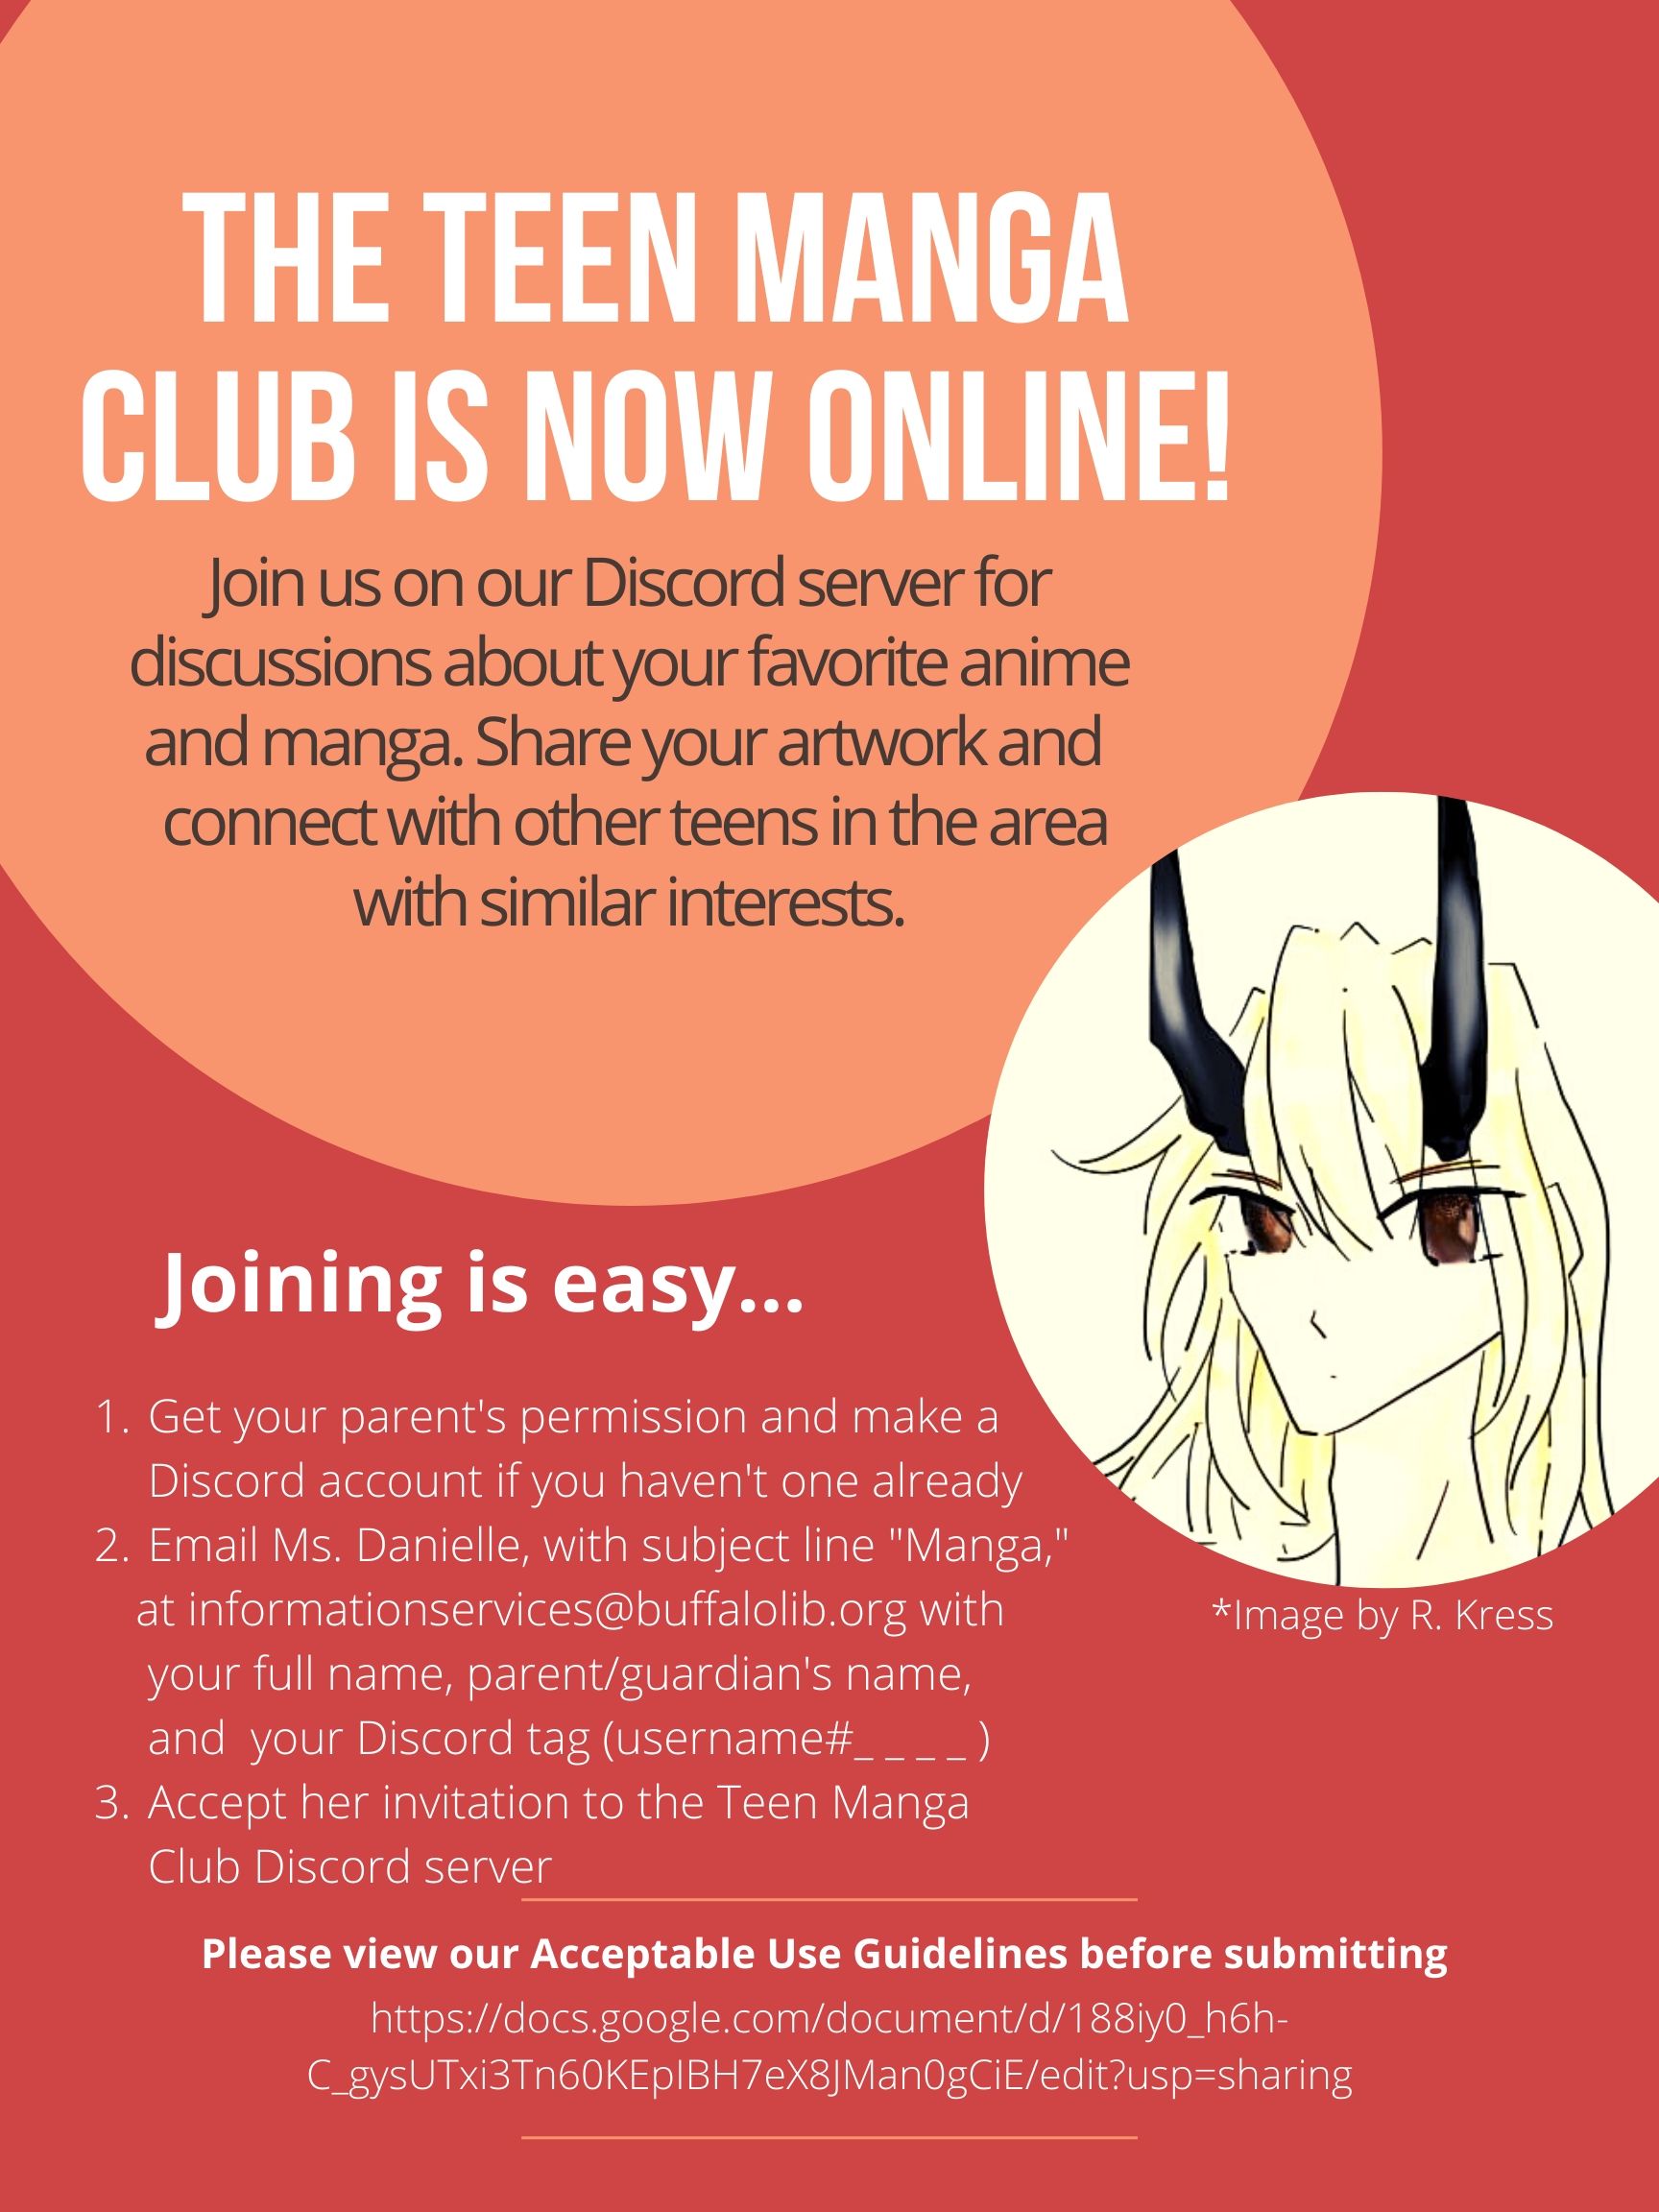 Anime discussion chat (Discord server) - Club 